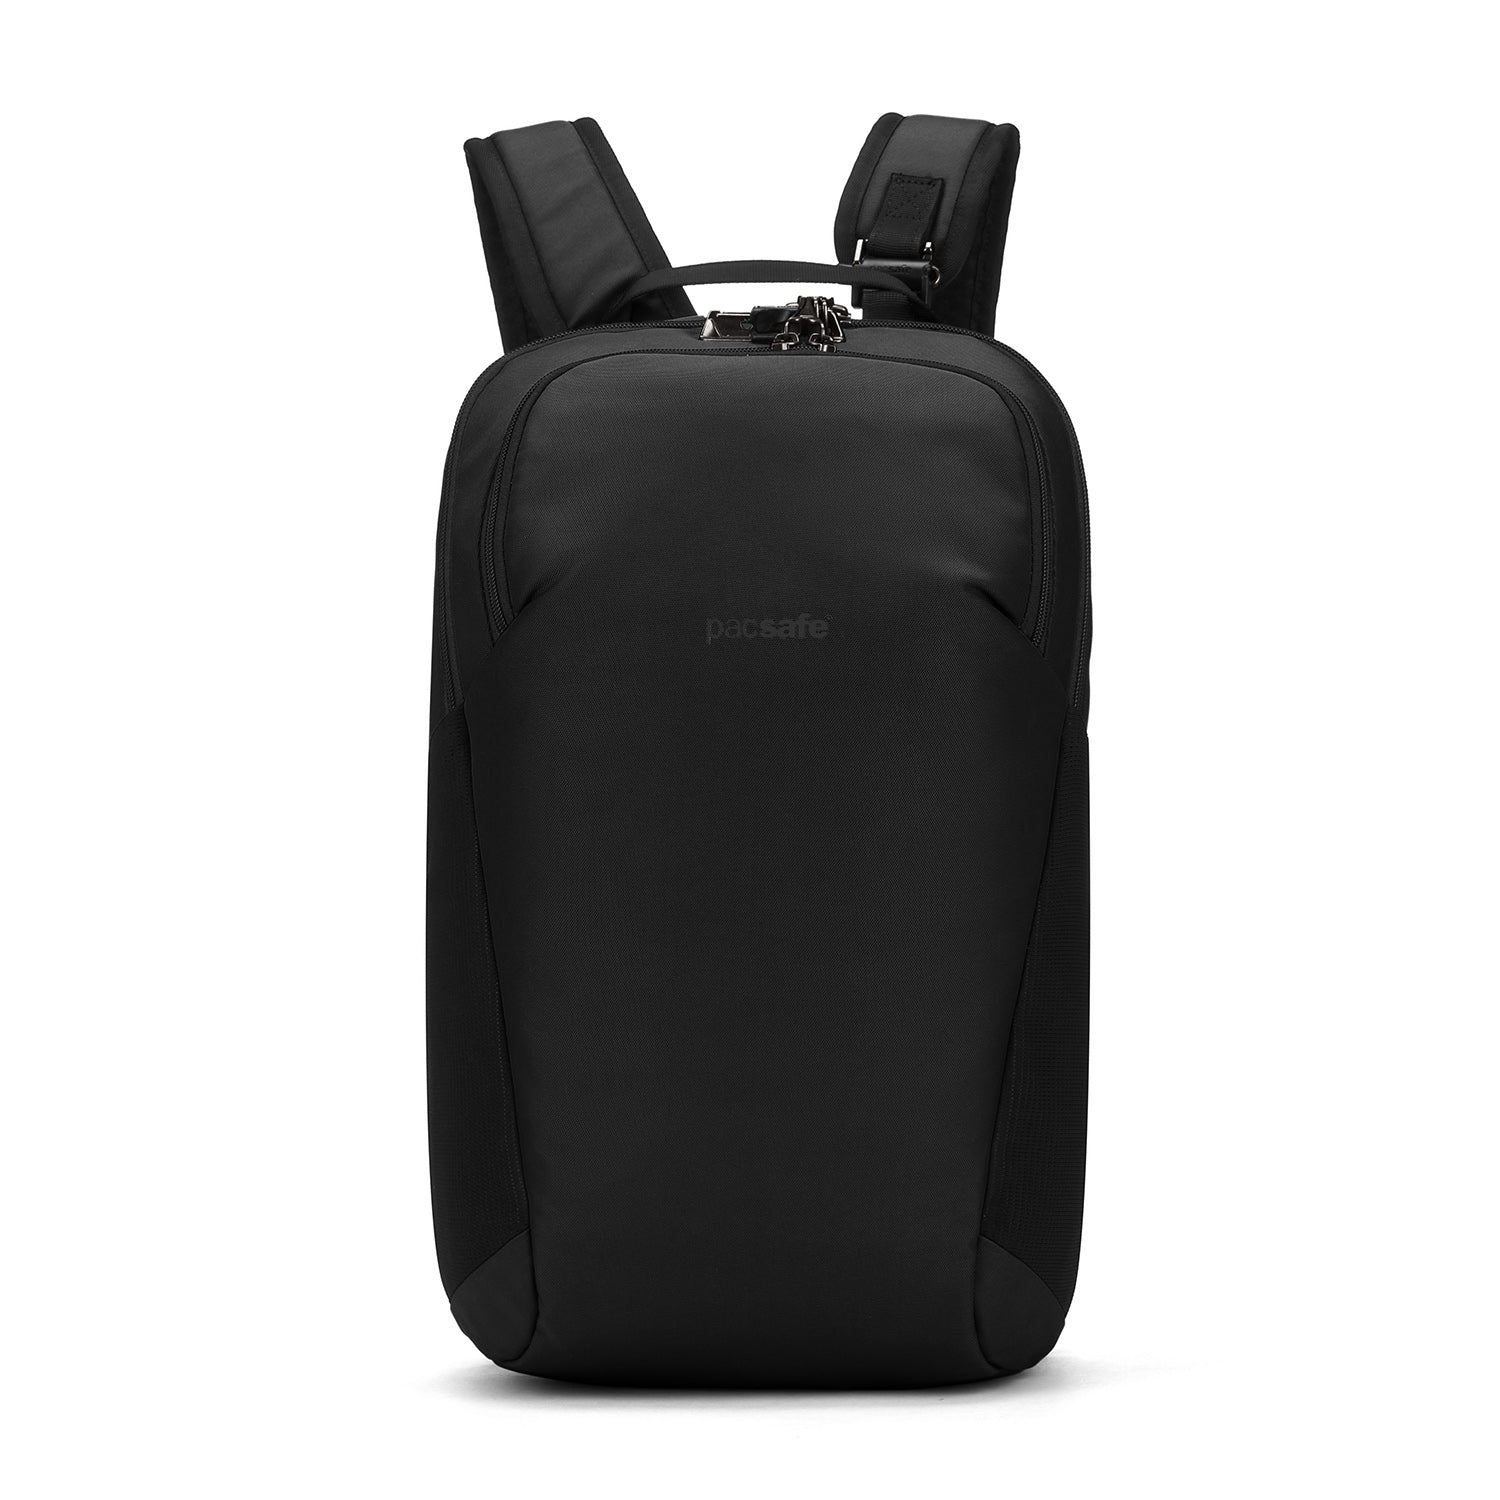 Black Polyester Travel Bag with Multiple Compartments - Safe